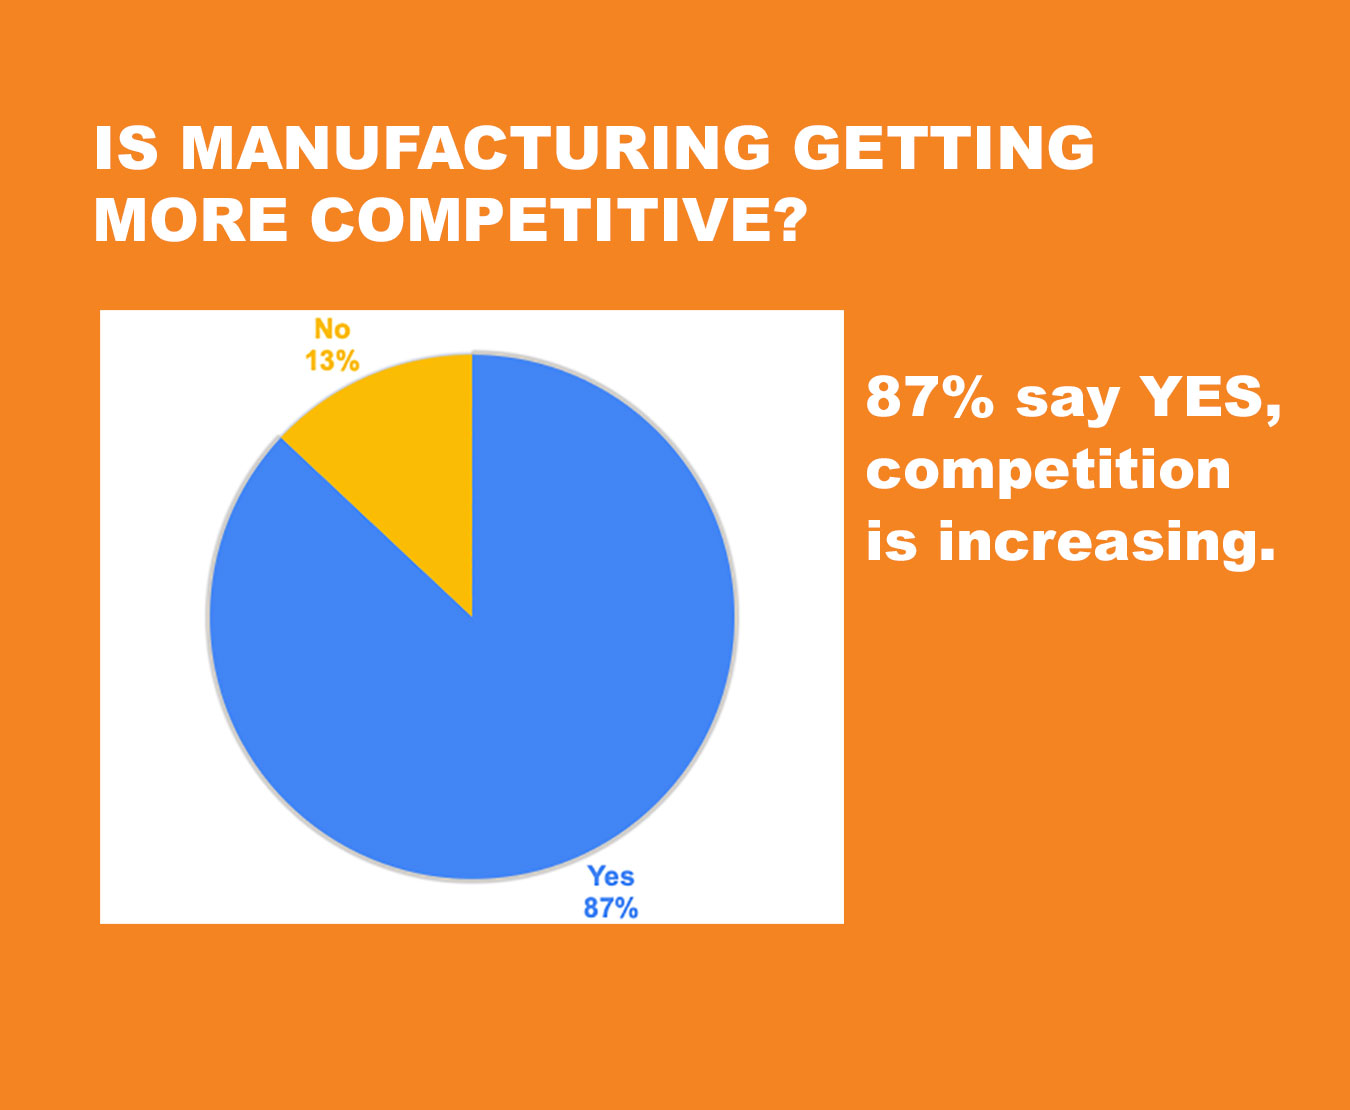 manufacturing competitive advantage trend: virtual showrooms. Image shows that 87% of manufacturers say the sector has gotten more competitive.